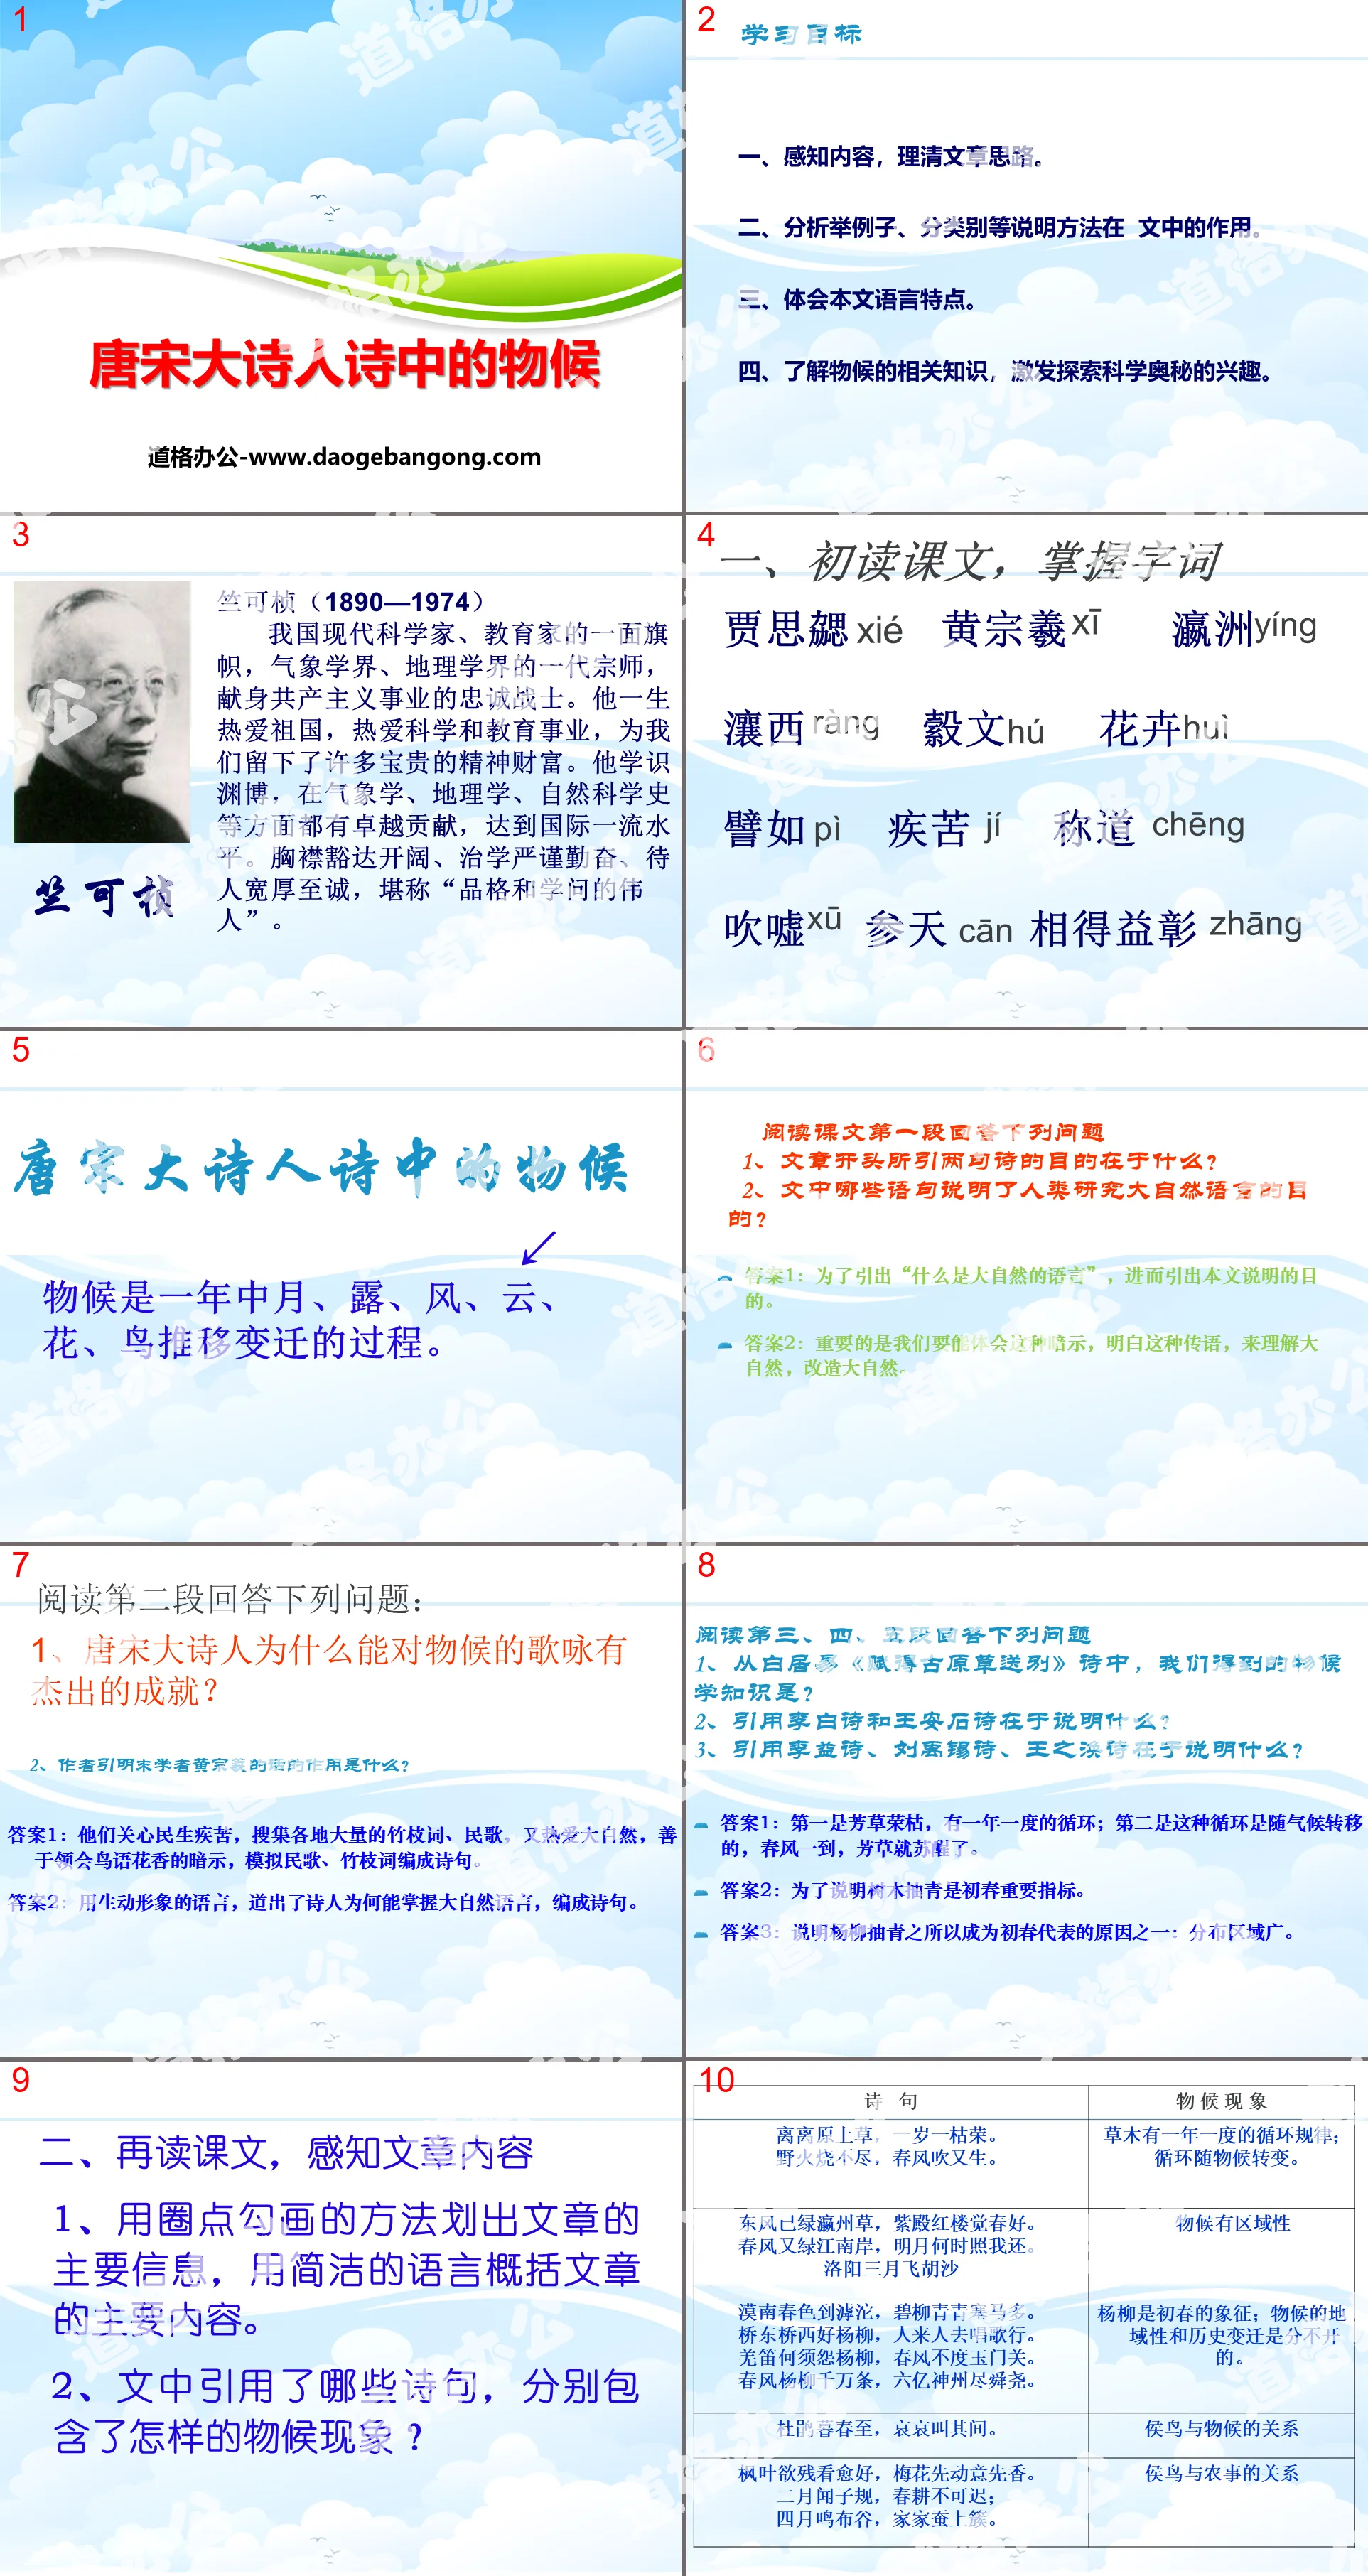 "Phenology in the Poems of Great Poets of the Tang and Song Dynasties" PPT download